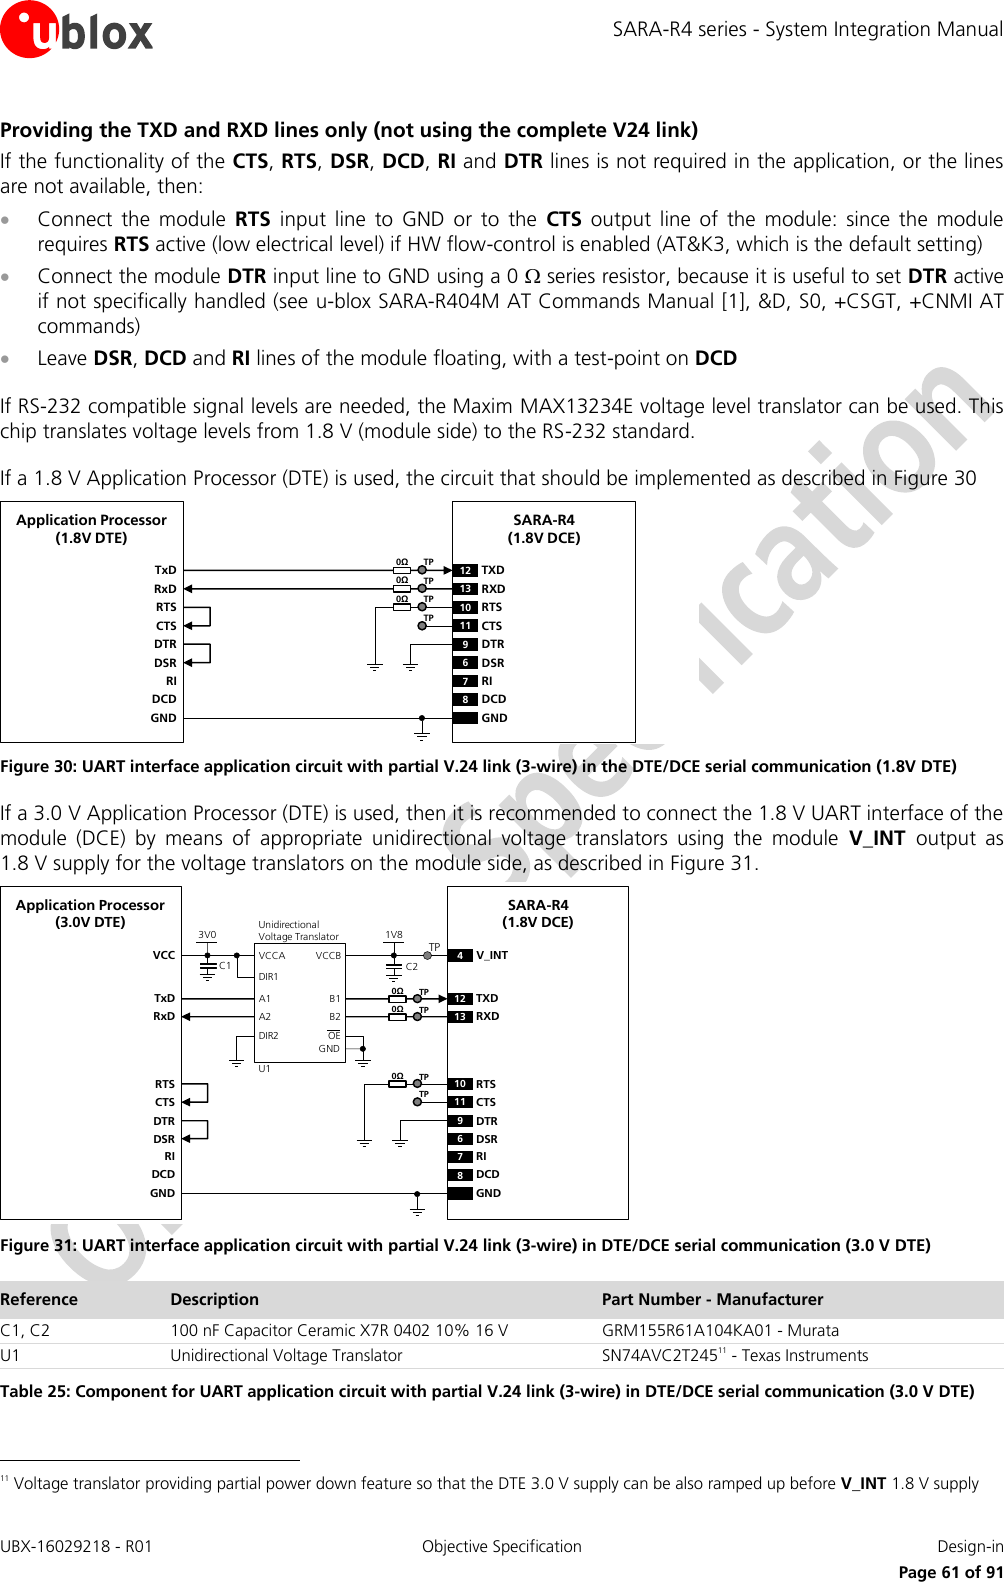 SARA-R4 series - System Integration Manual UBX-16029218 - R01  Objective Specification  Design-in     Page 61 of 91 Providing the TXD and RXD lines only (not using the complete V24 link) If the functionality of the CTS, RTS, DSR, DCD, RI and DTR lines is not required in the application, or the lines are not available, then:  Connect  the  module  RTS  input  line  to  GND  or  to  the  CTS  output  line  of  the  module:  since  the  module requires RTS active (low electrical level) if HW flow-control is enabled (AT&amp;K3, which is the default setting)  Connect the module DTR input line to GND using a 0  series resistor, because it is useful to set DTR active if not specifically handled (see u-blox SARA-R404M AT Commands Manual [1], &amp;D, S0, +CSGT, +CNMI AT commands)  Leave DSR, DCD and RI lines of the module floating, with a test-point on DCD  If RS-232 compatible signal levels are needed, the Maxim MAX13234E voltage level translator can be used. This chip translates voltage levels from 1.8 V (module side) to the RS-232 standard.   If a 1.8 V Application Processor (DTE) is used, the circuit that should be implemented as described in Figure 30 TxDApplication Processor(1.8V DTE)RxDRTSCTSDTRDSRRIDCDGNDSARA-R4(1.8V DCE)12 TXD9DTR13 RXD10 RTS11 CTS6DSR7RI8DCDGND0ΩTP0ΩTP0ΩTPTP Figure 30: UART interface application circuit with partial V.24 link (3-wire) in the DTE/DCE serial communication (1.8V DTE) If a 3.0 V Application Processor (DTE) is used, then it is recommended to connect the 1.8 V UART interface of the module  (DCE)  by  means  of  appropriate  unidirectional  voltage  translators  using  the  module  V_INT  output  as 1.8 V supply for the voltage translators on the module side, as described in Figure 31. 4V_INTTxDApplication Processor(3.0V DTE)RxDDTRDSRRIDCDGNDSARA-R4(1.8V DCE)12 TXD9DTR13 RXD6DSR7RI8DCDGND1V8B1 A1GNDU1VCCBVCCAUnidirectionalVoltage TranslatorC1 C23V0DIR1DIR2 OEVCCB2 A2RTSCTS10 RTS11 CTSTP0ΩTP0ΩTP0ΩTPTP Figure 31: UART interface application circuit with partial V.24 link (3-wire) in DTE/DCE serial communication (3.0 V DTE) Reference Description Part Number - Manufacturer C1, C2 100 nF Capacitor Ceramic X7R 0402 10% 16 V GRM155R61A104KA01 - Murata U1 Unidirectional Voltage Translator SN74AVC2T24511 - Texas Instruments Table 25: Component for UART application circuit with partial V.24 link (3-wire) in DTE/DCE serial communication (3.0 V DTE)                                                        11 Voltage translator providing partial power down feature so that the DTE 3.0 V supply can be also ramped up before V_INT 1.8 V supply 